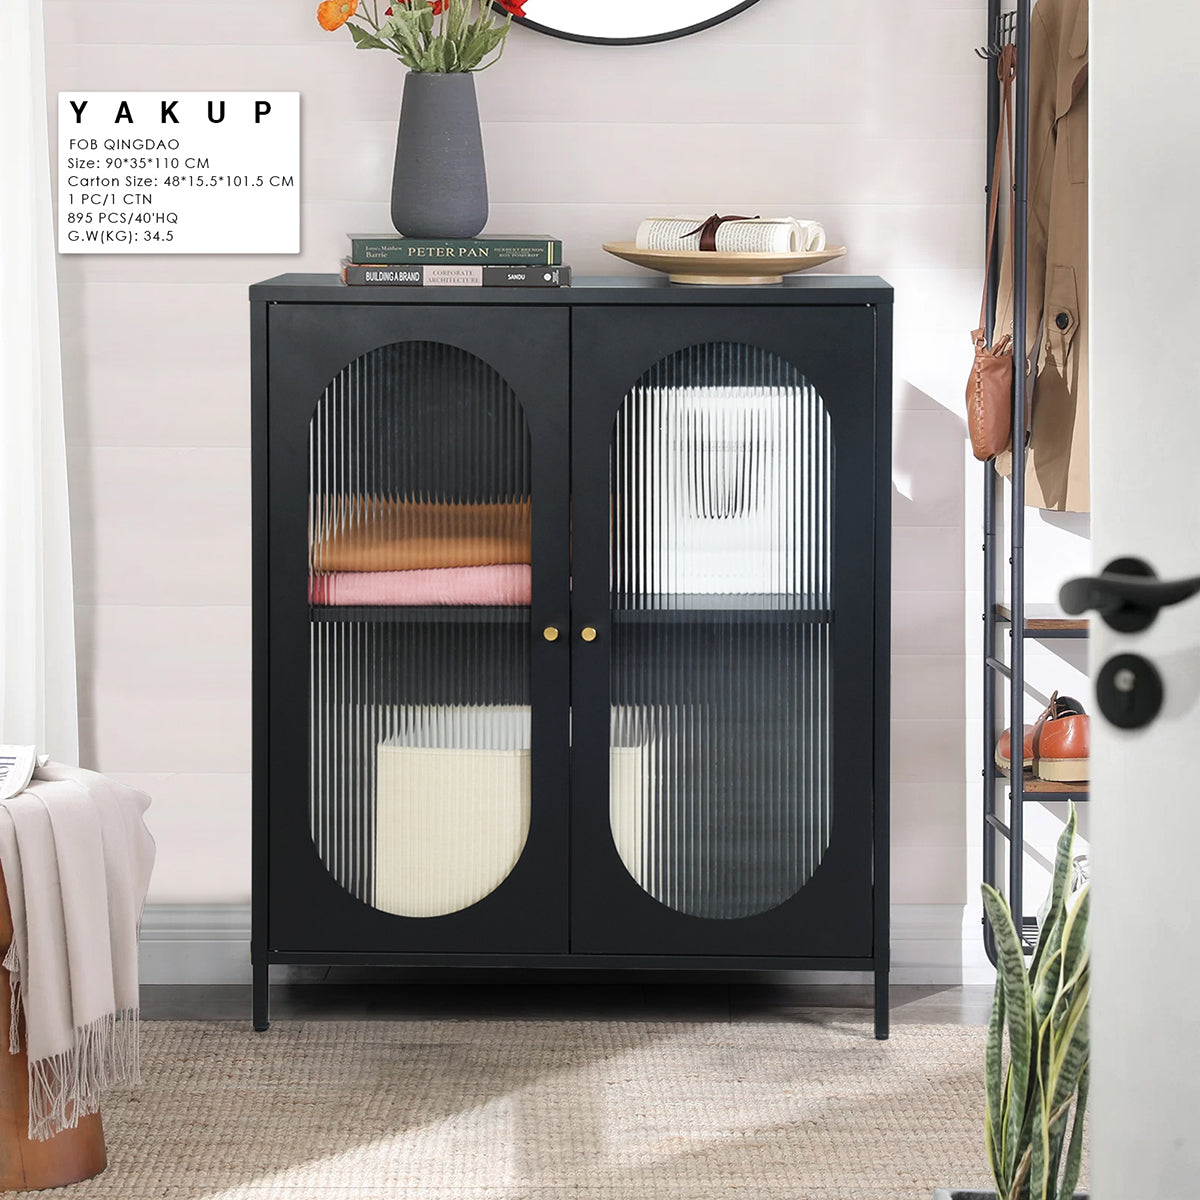 Chest of drawers/storage cabinet in black metal with industrial style shelf, 2 wired glass doors - YAKUP